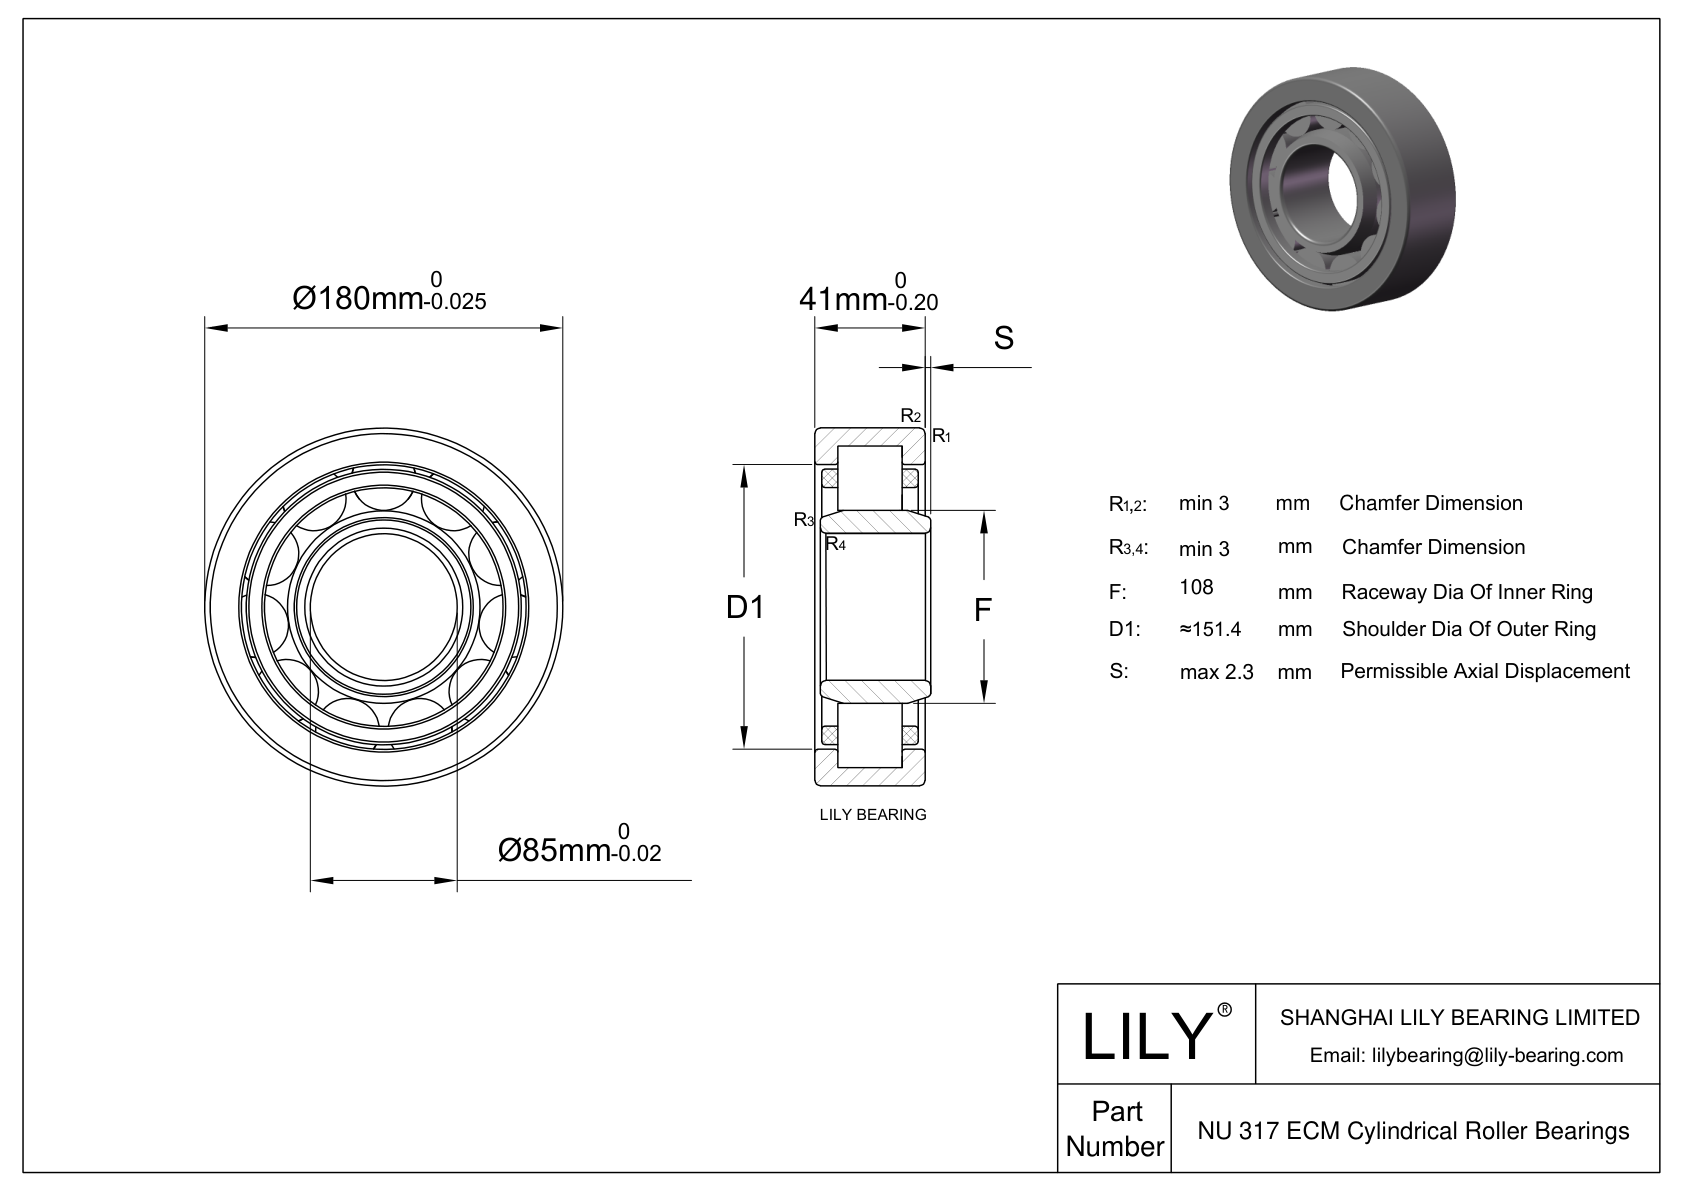 NU 317 ECM/C3VL0241 Ceramic Coated Cylindrical Roller Bearings cad drawing